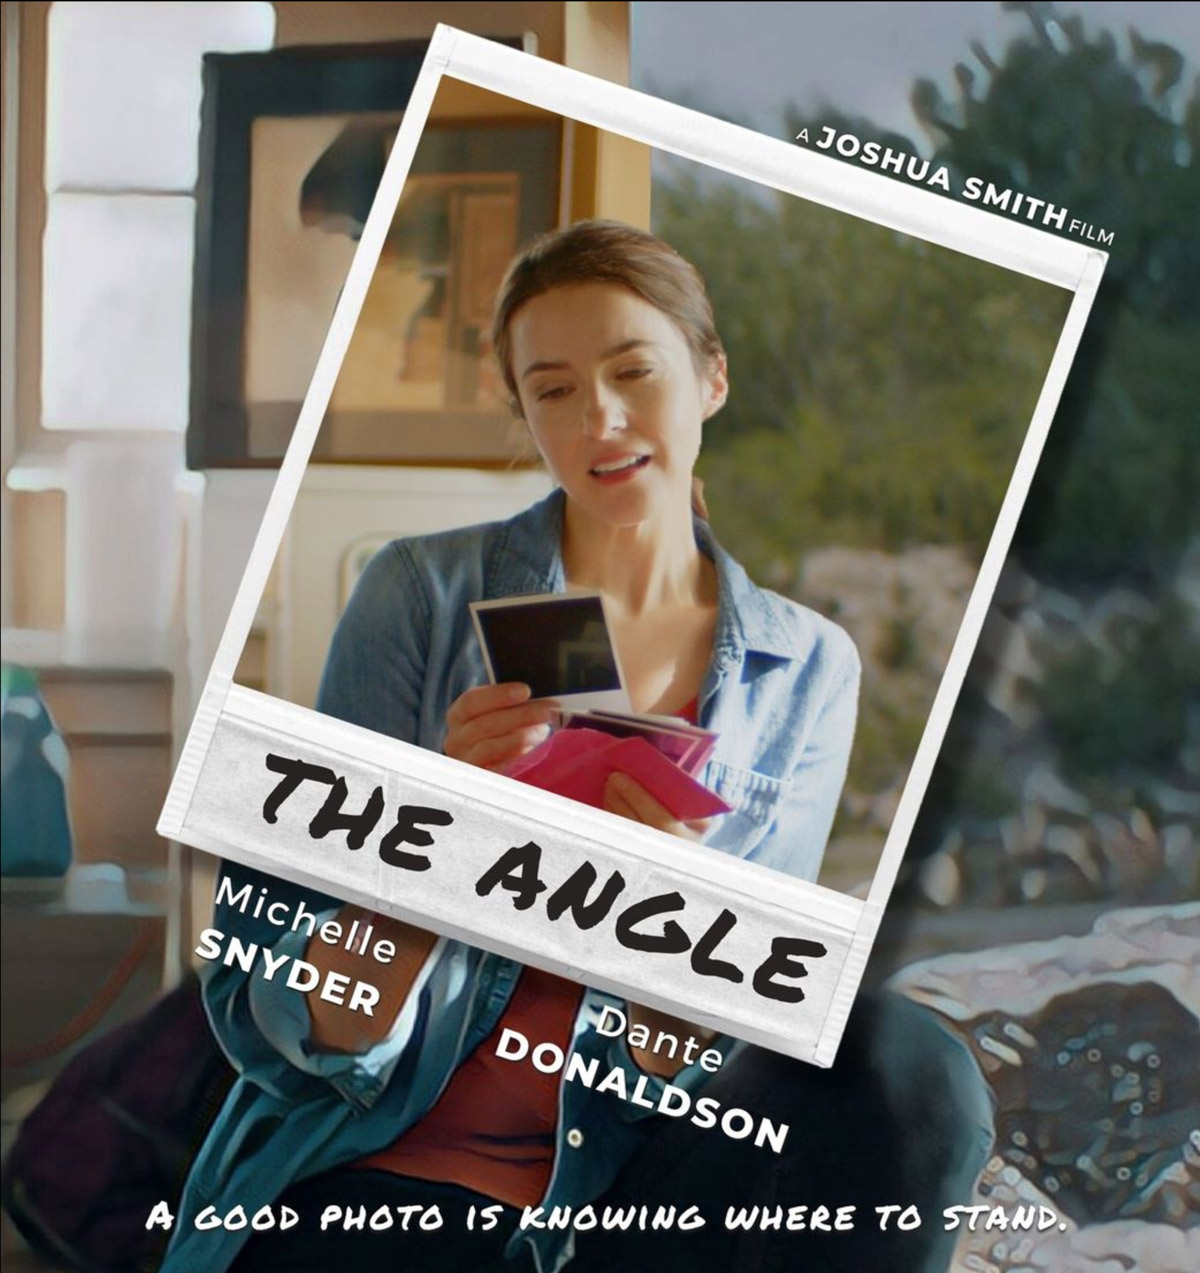 The Angle short film